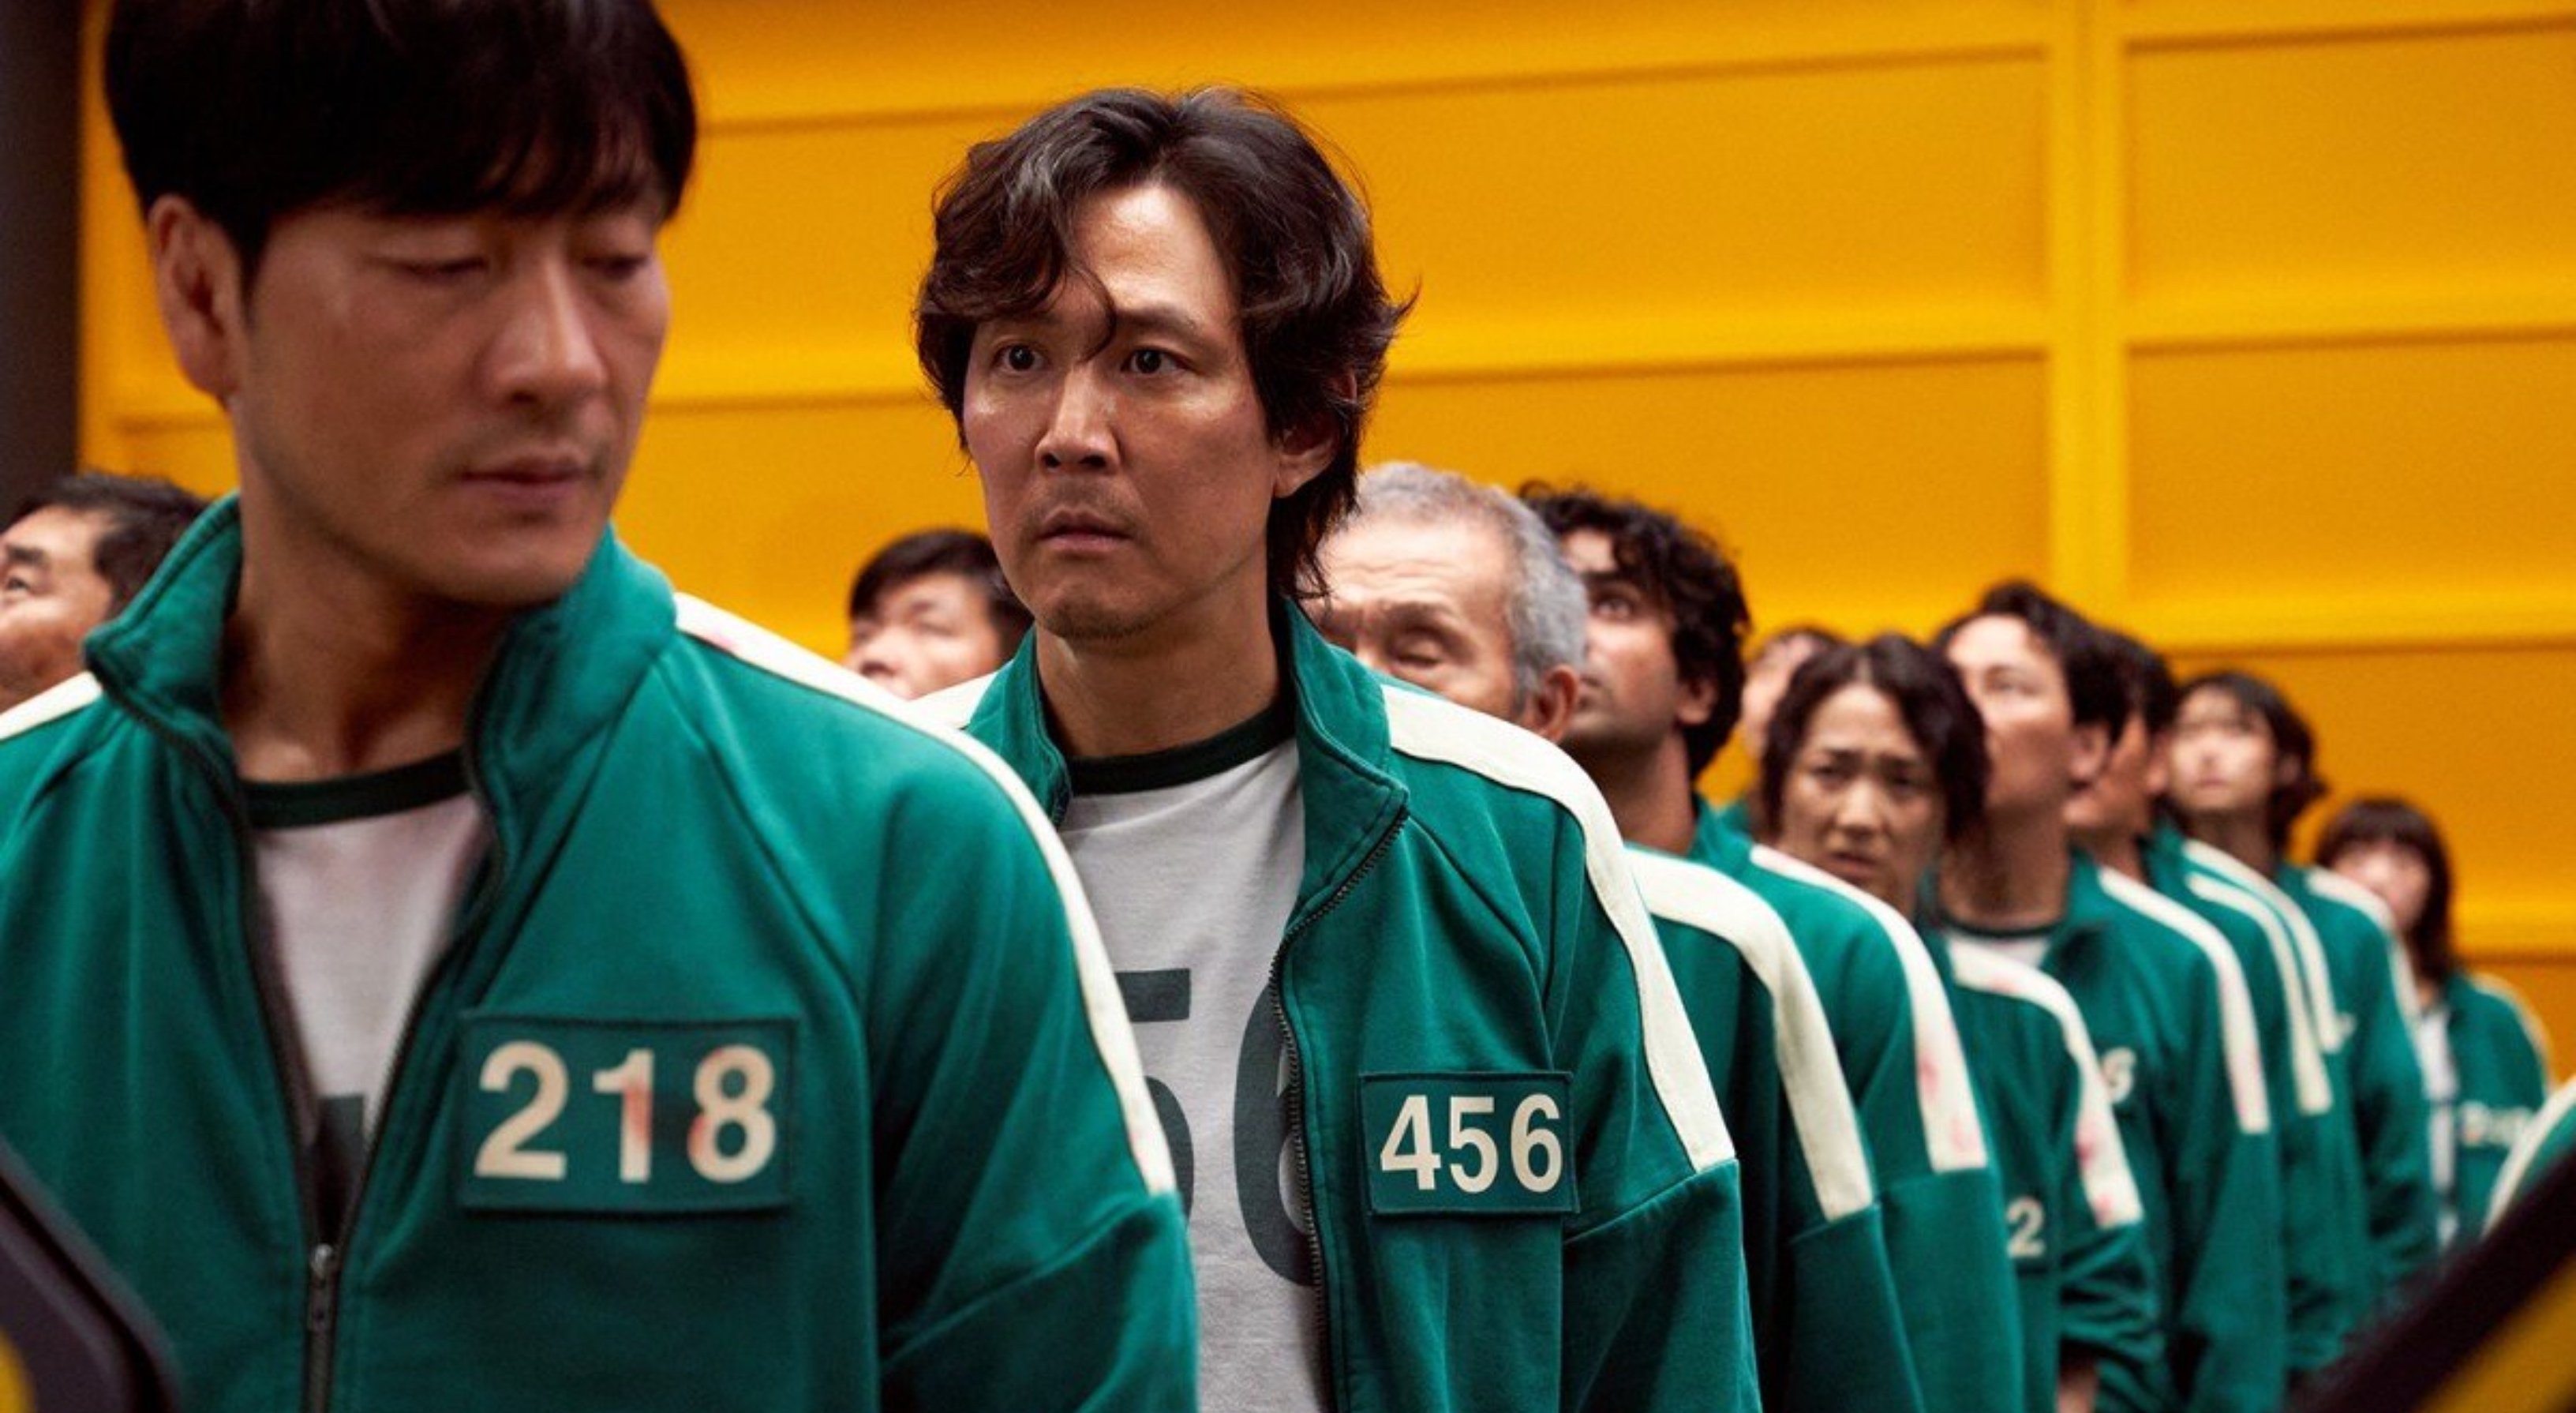 Lee Jung-Jae in Netflix's 'Squid Game' cast wearing green tracksuit in a line with other cast members